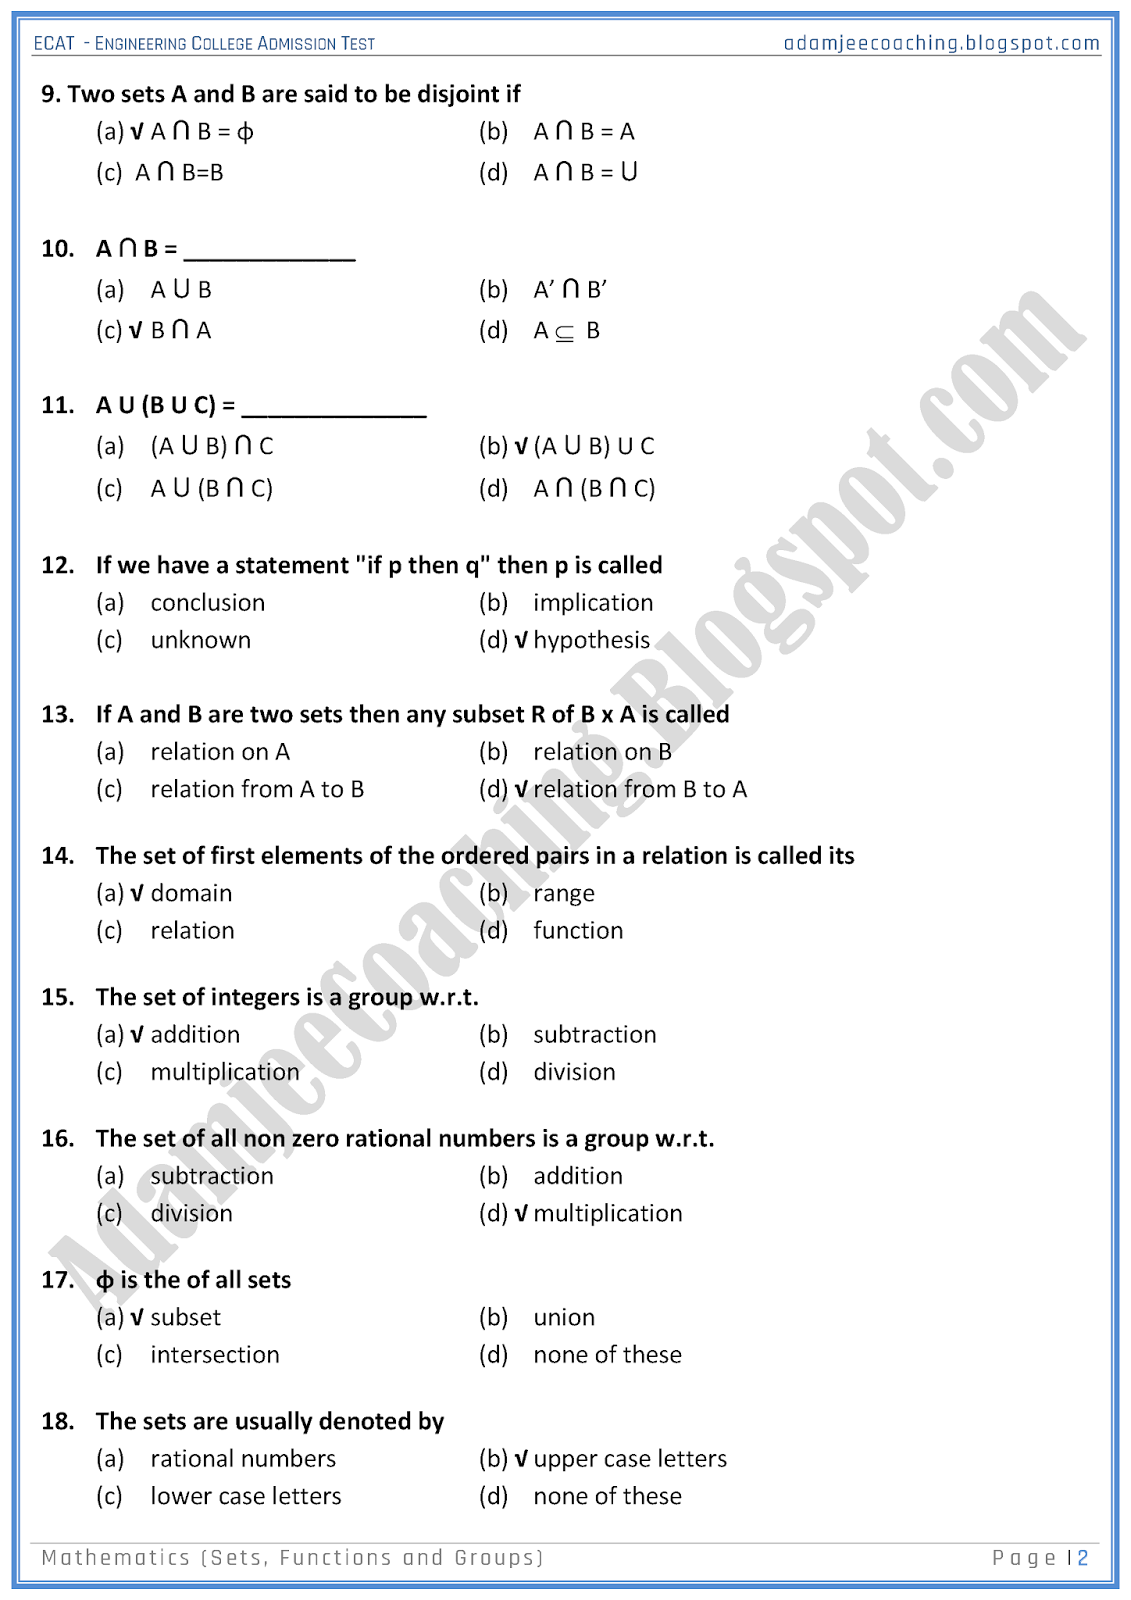 Mathematical Questions For Aptitude Test